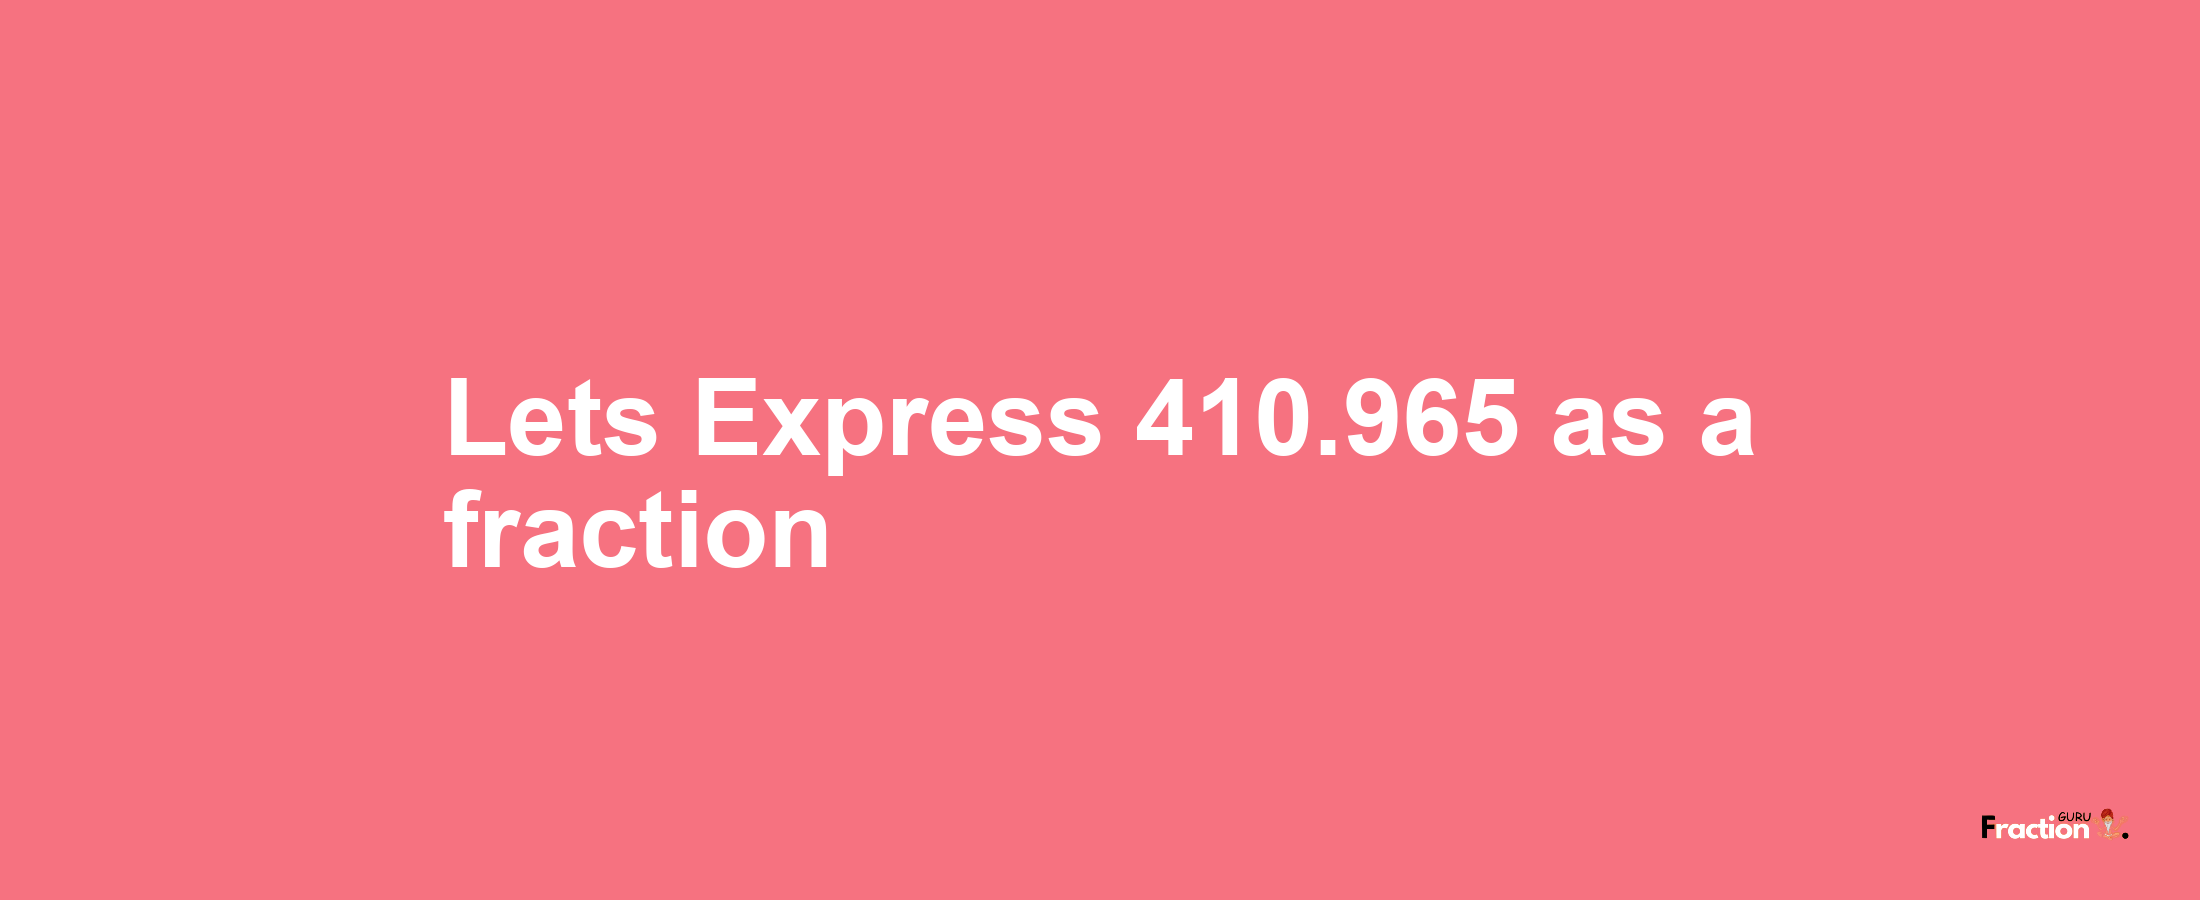 Lets Express 410.965 as afraction